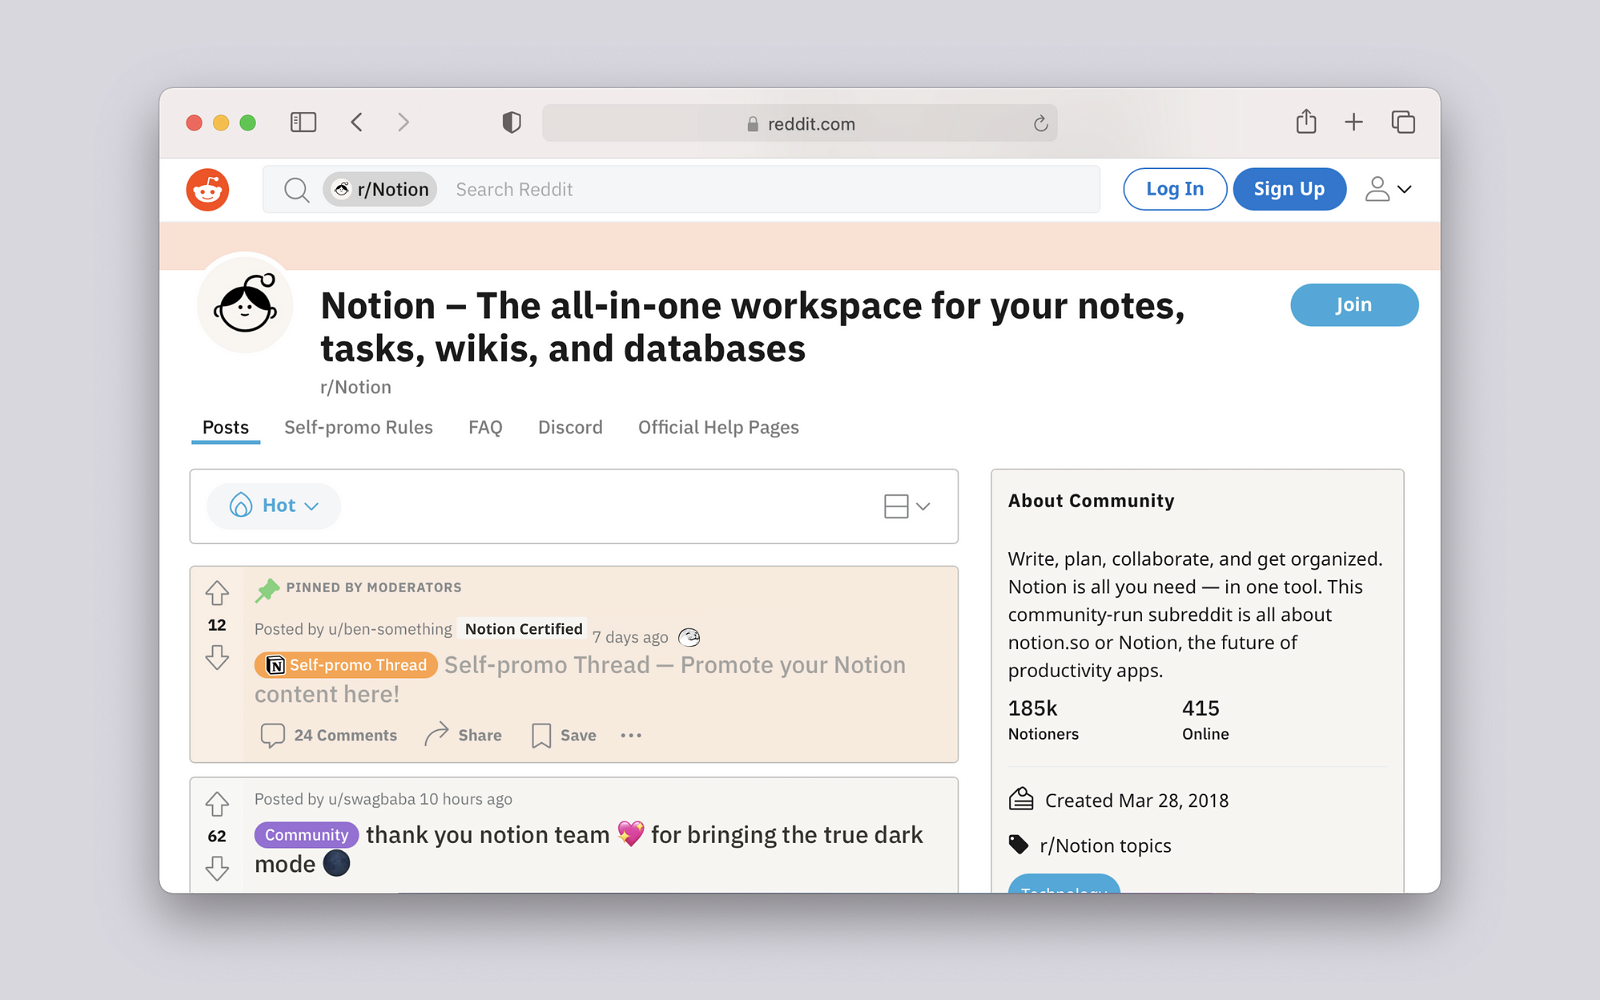 Get Reddit flair and build alongside the r/Notion community. 🔗